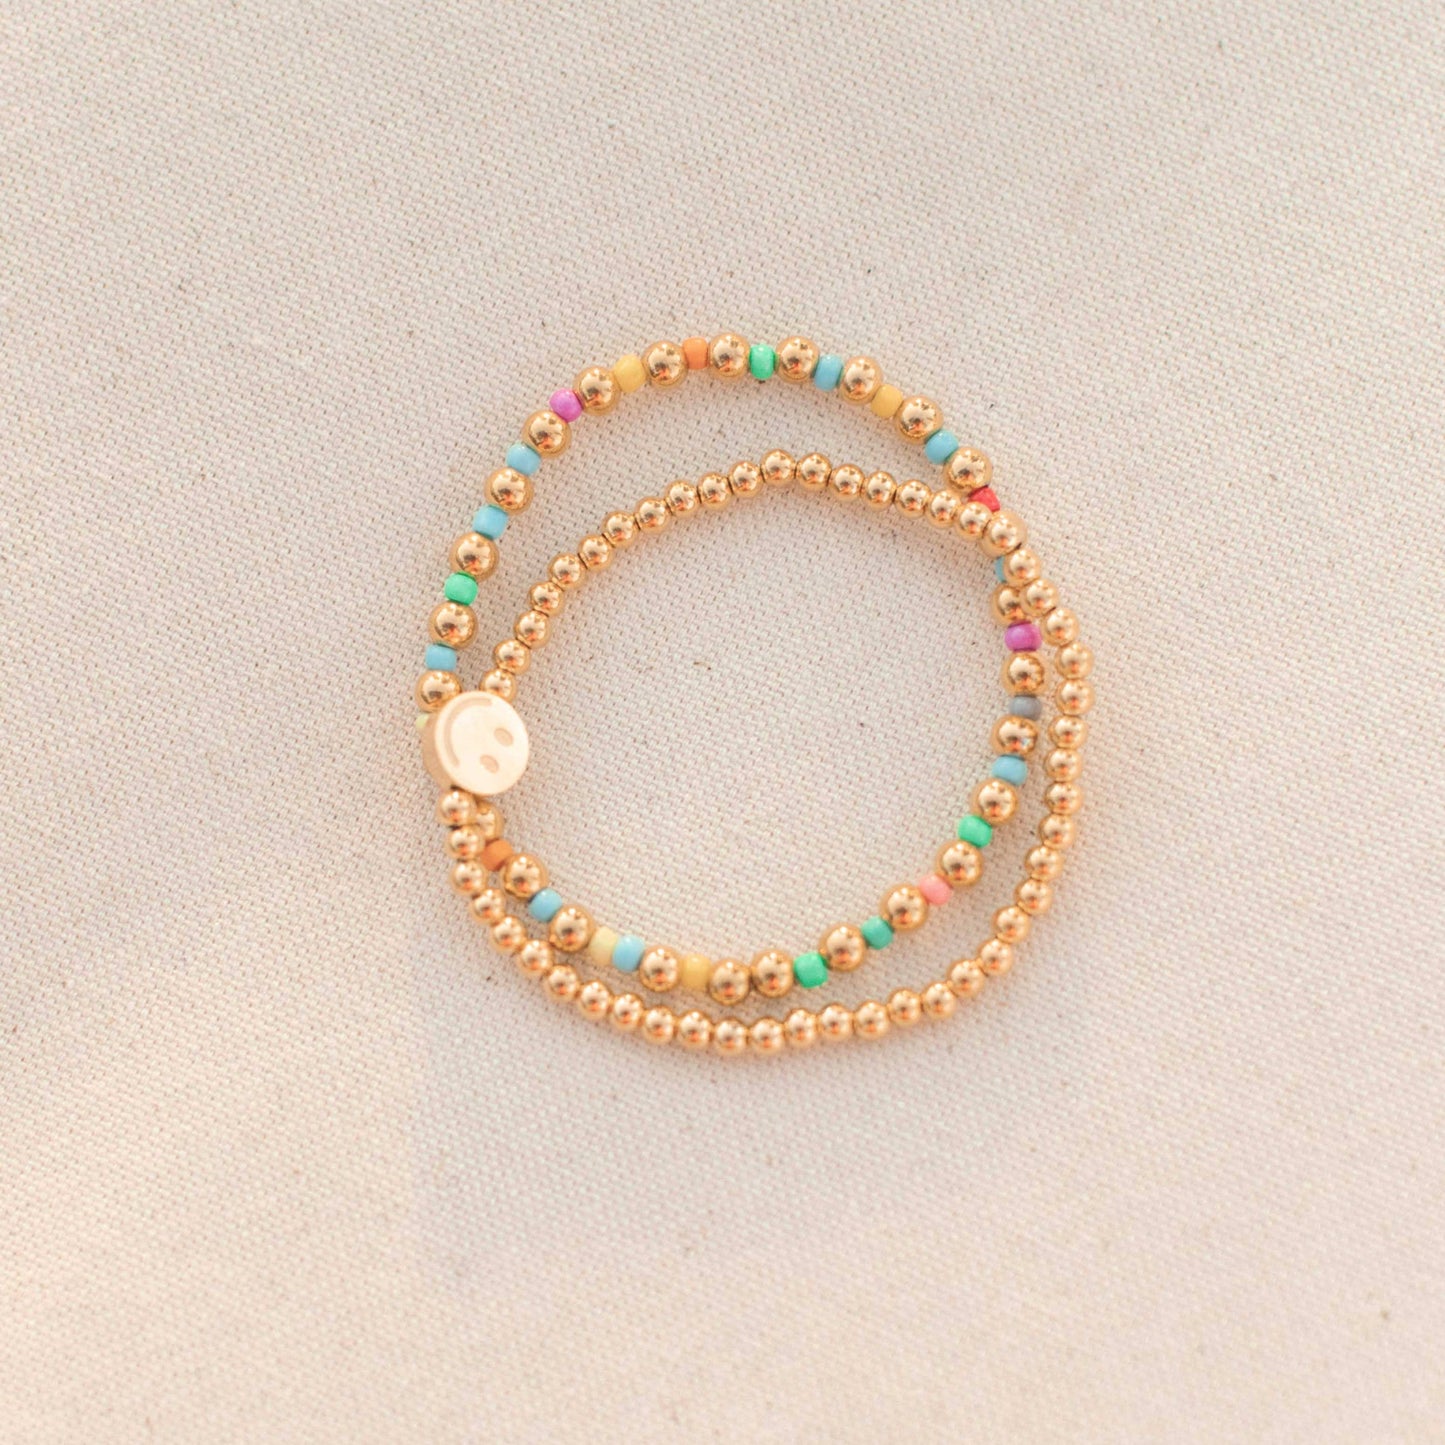 Gold and Multicolor Bead Bracelet